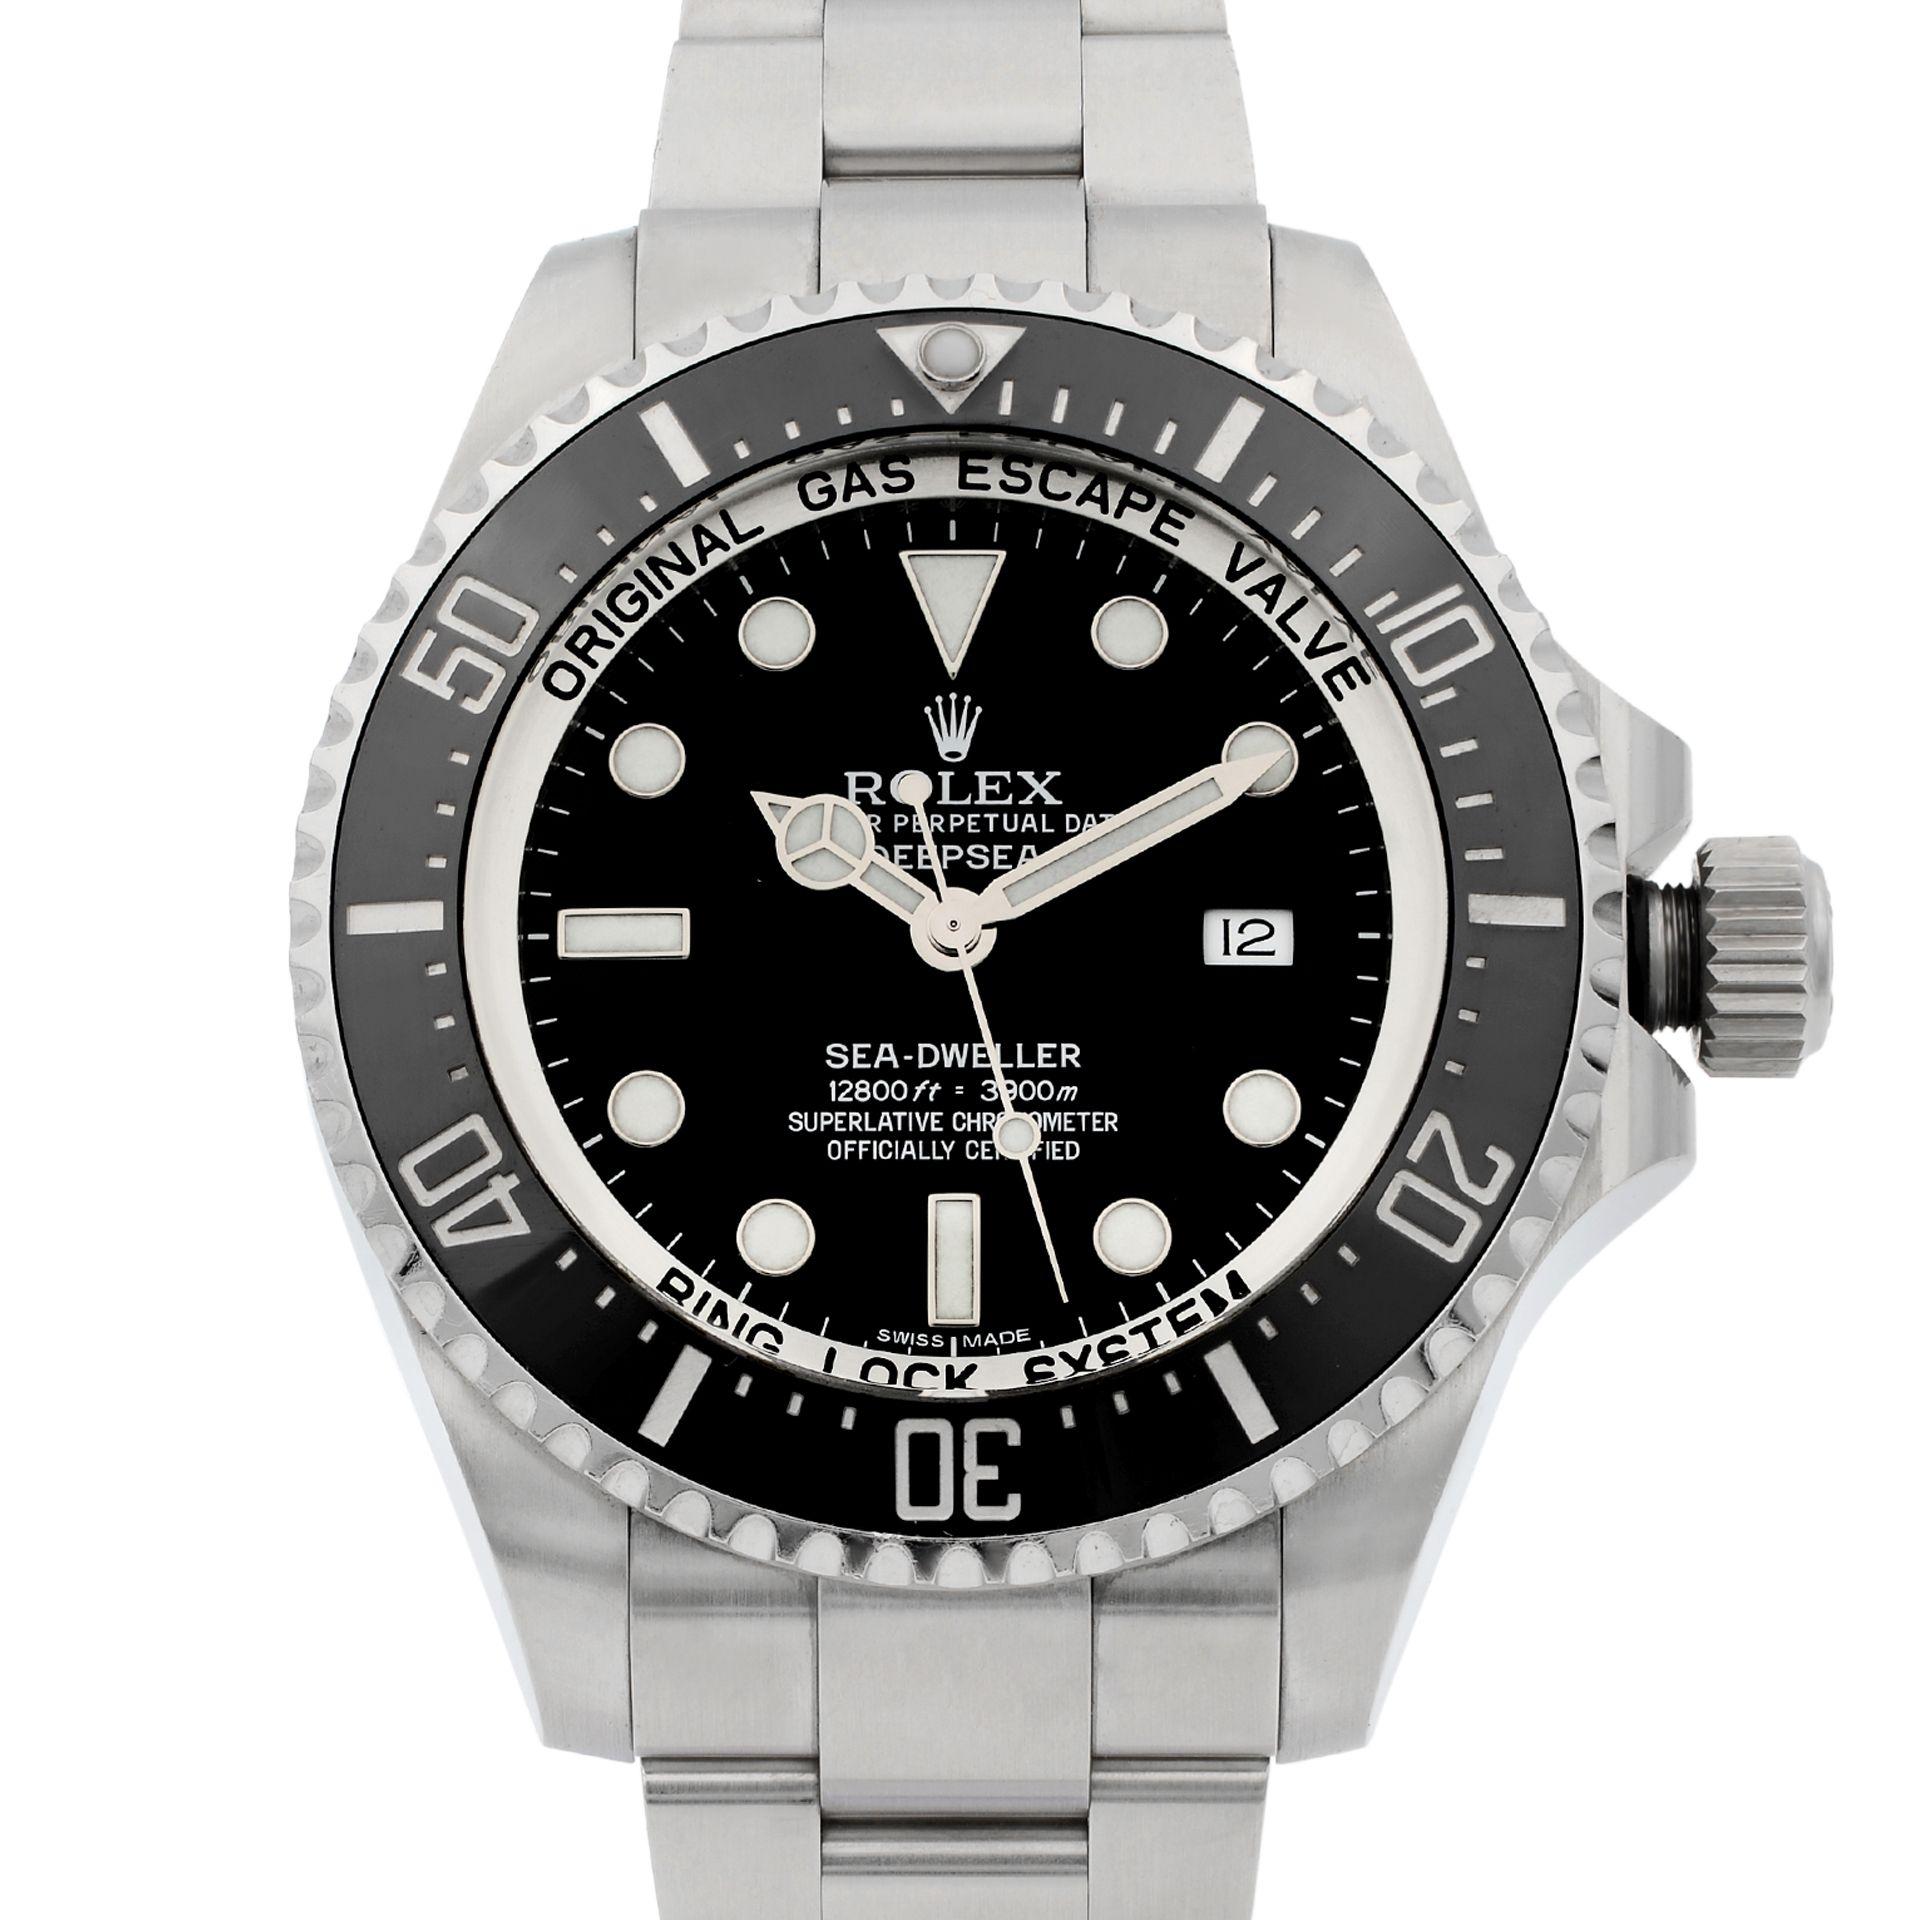 This pre-owned Rolex Deepsea  116660  is a beautiful men's timepiece that is powered by an automatic movement which is cased in a stainless steel case. It has a round shape face, date dial, and has hand sticks & dots style markers. It is completed